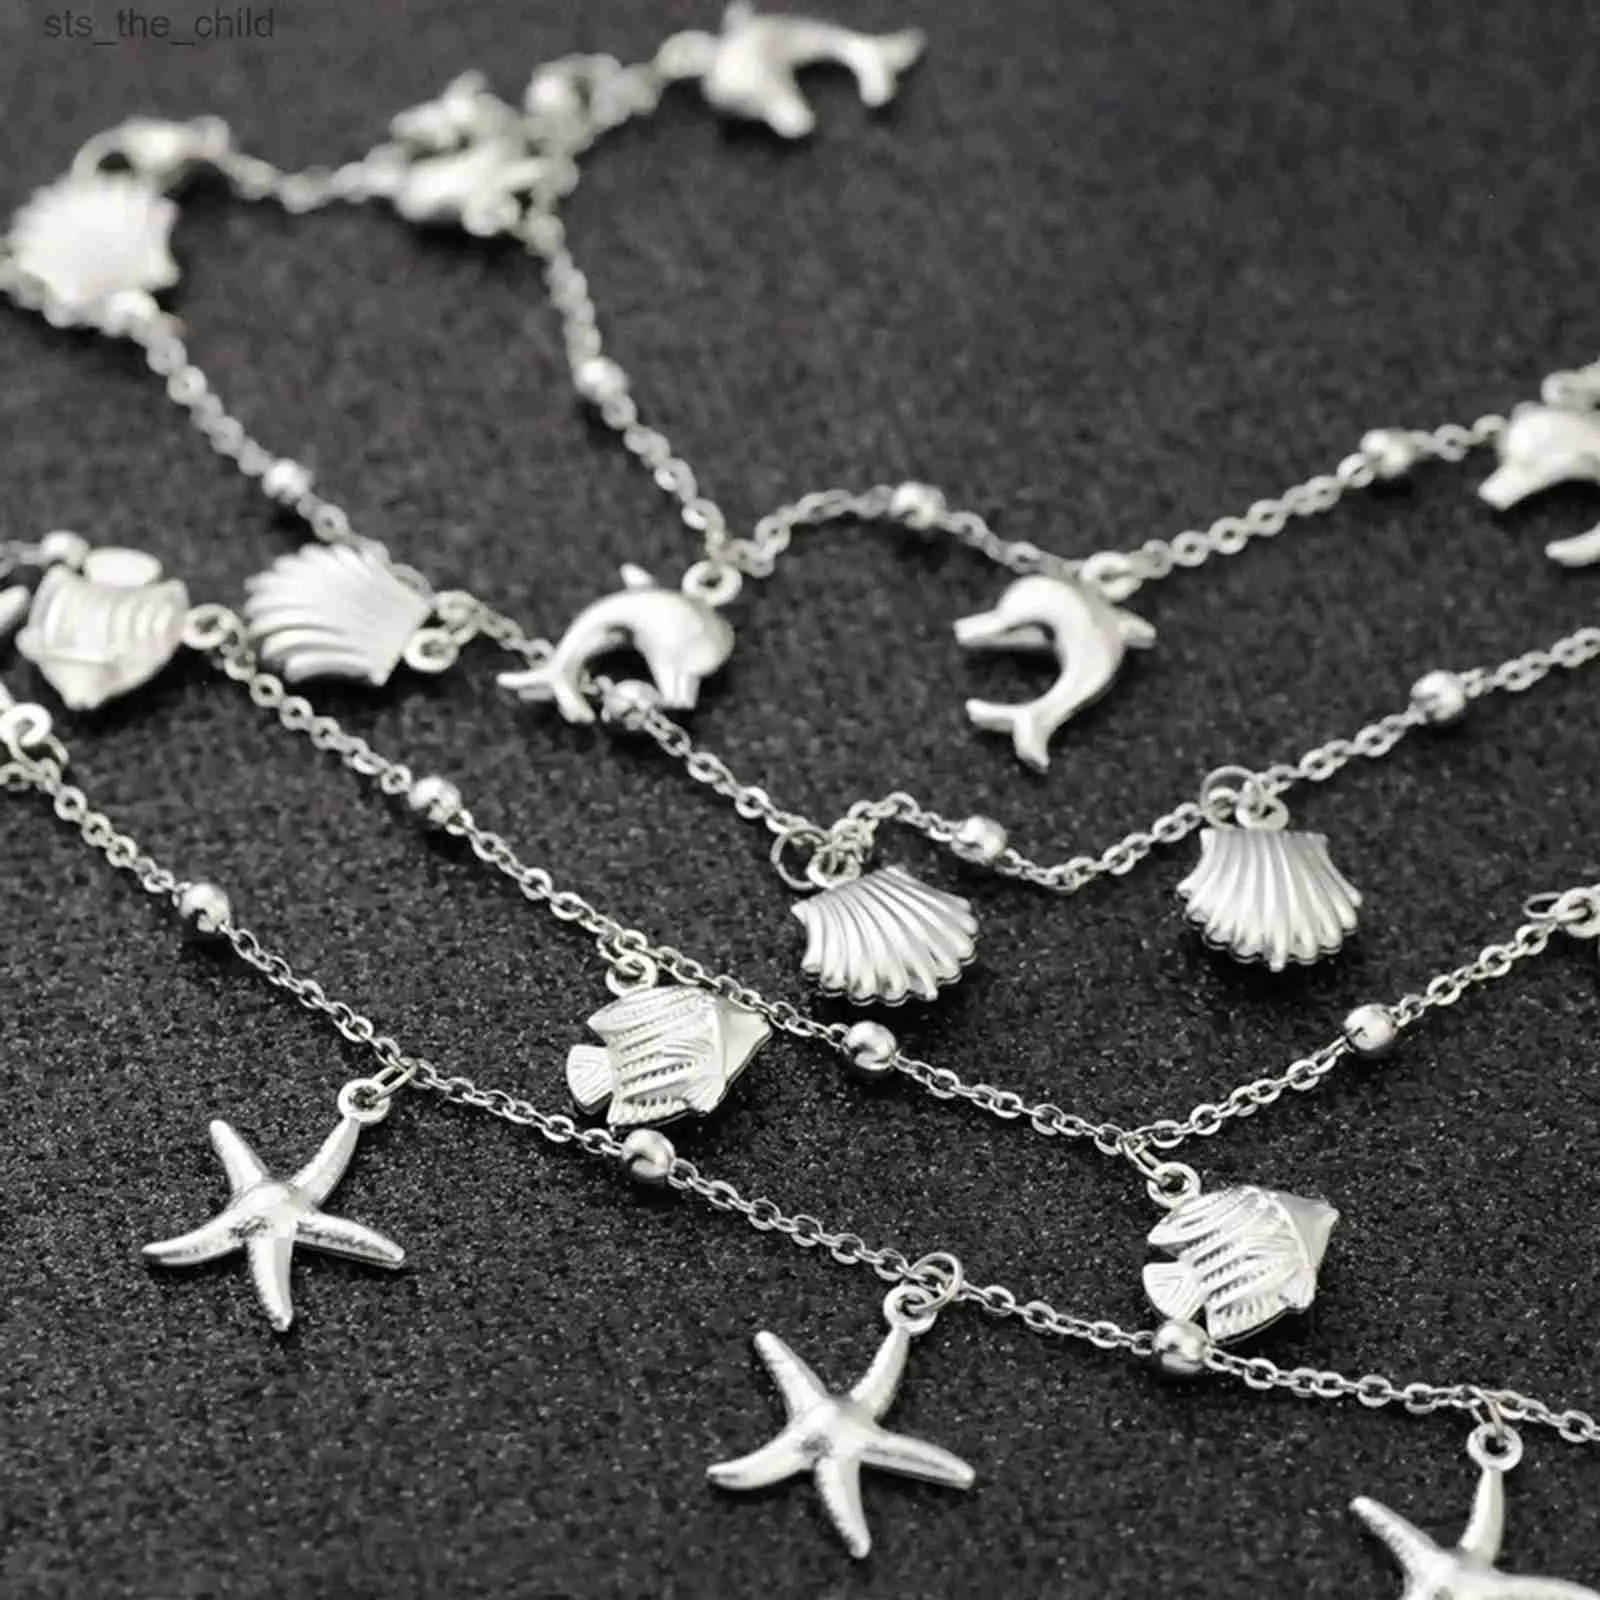 Anklets 1 stainless steel shell star dolphin ankle bracelet silver ocean hanging chain ankle bracelet womens summer beach barefoot sandals jewelryC24326